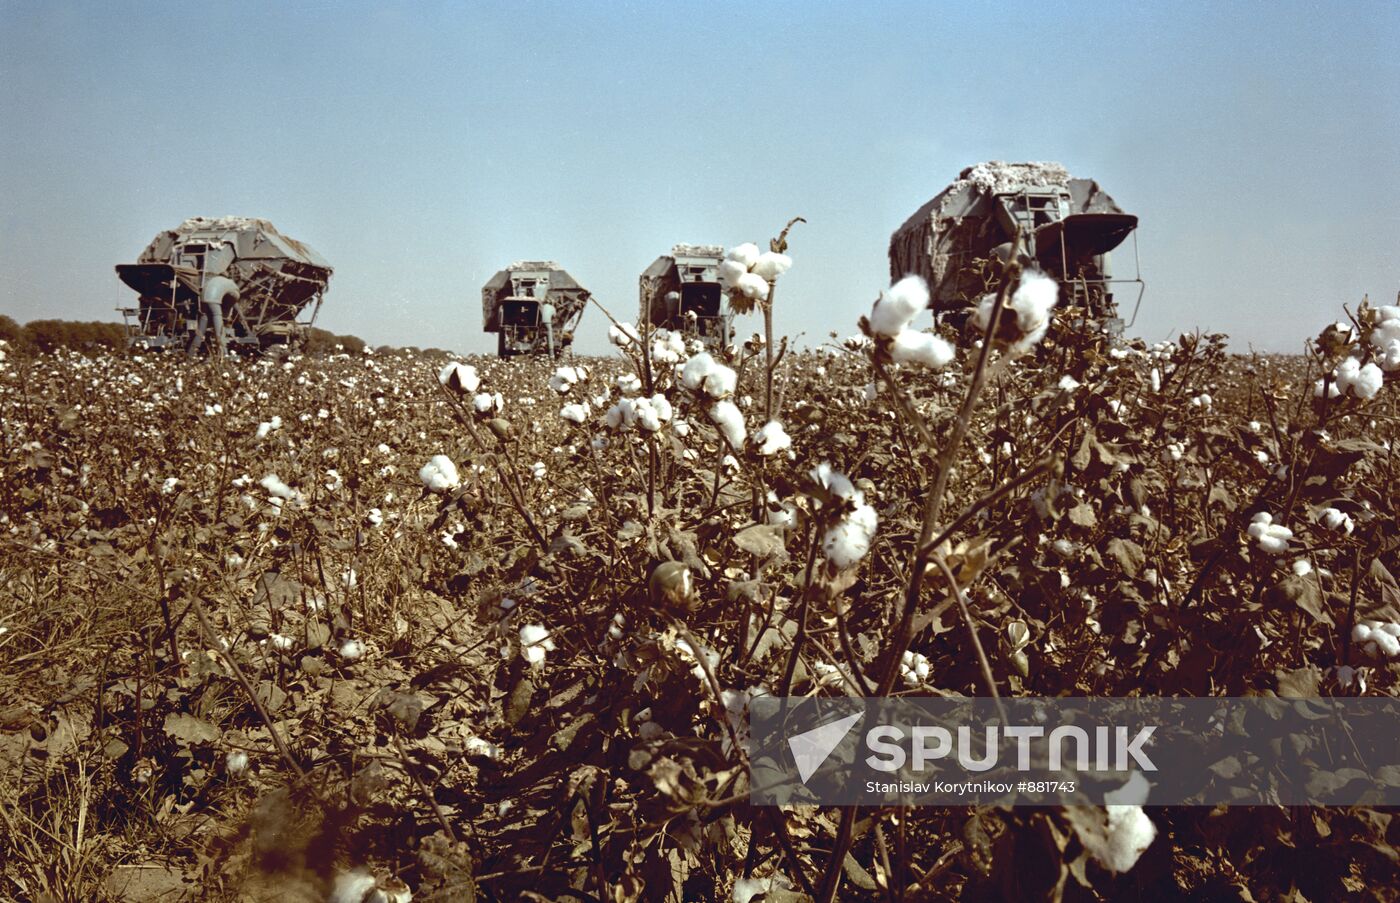 Cotton harvesters in action